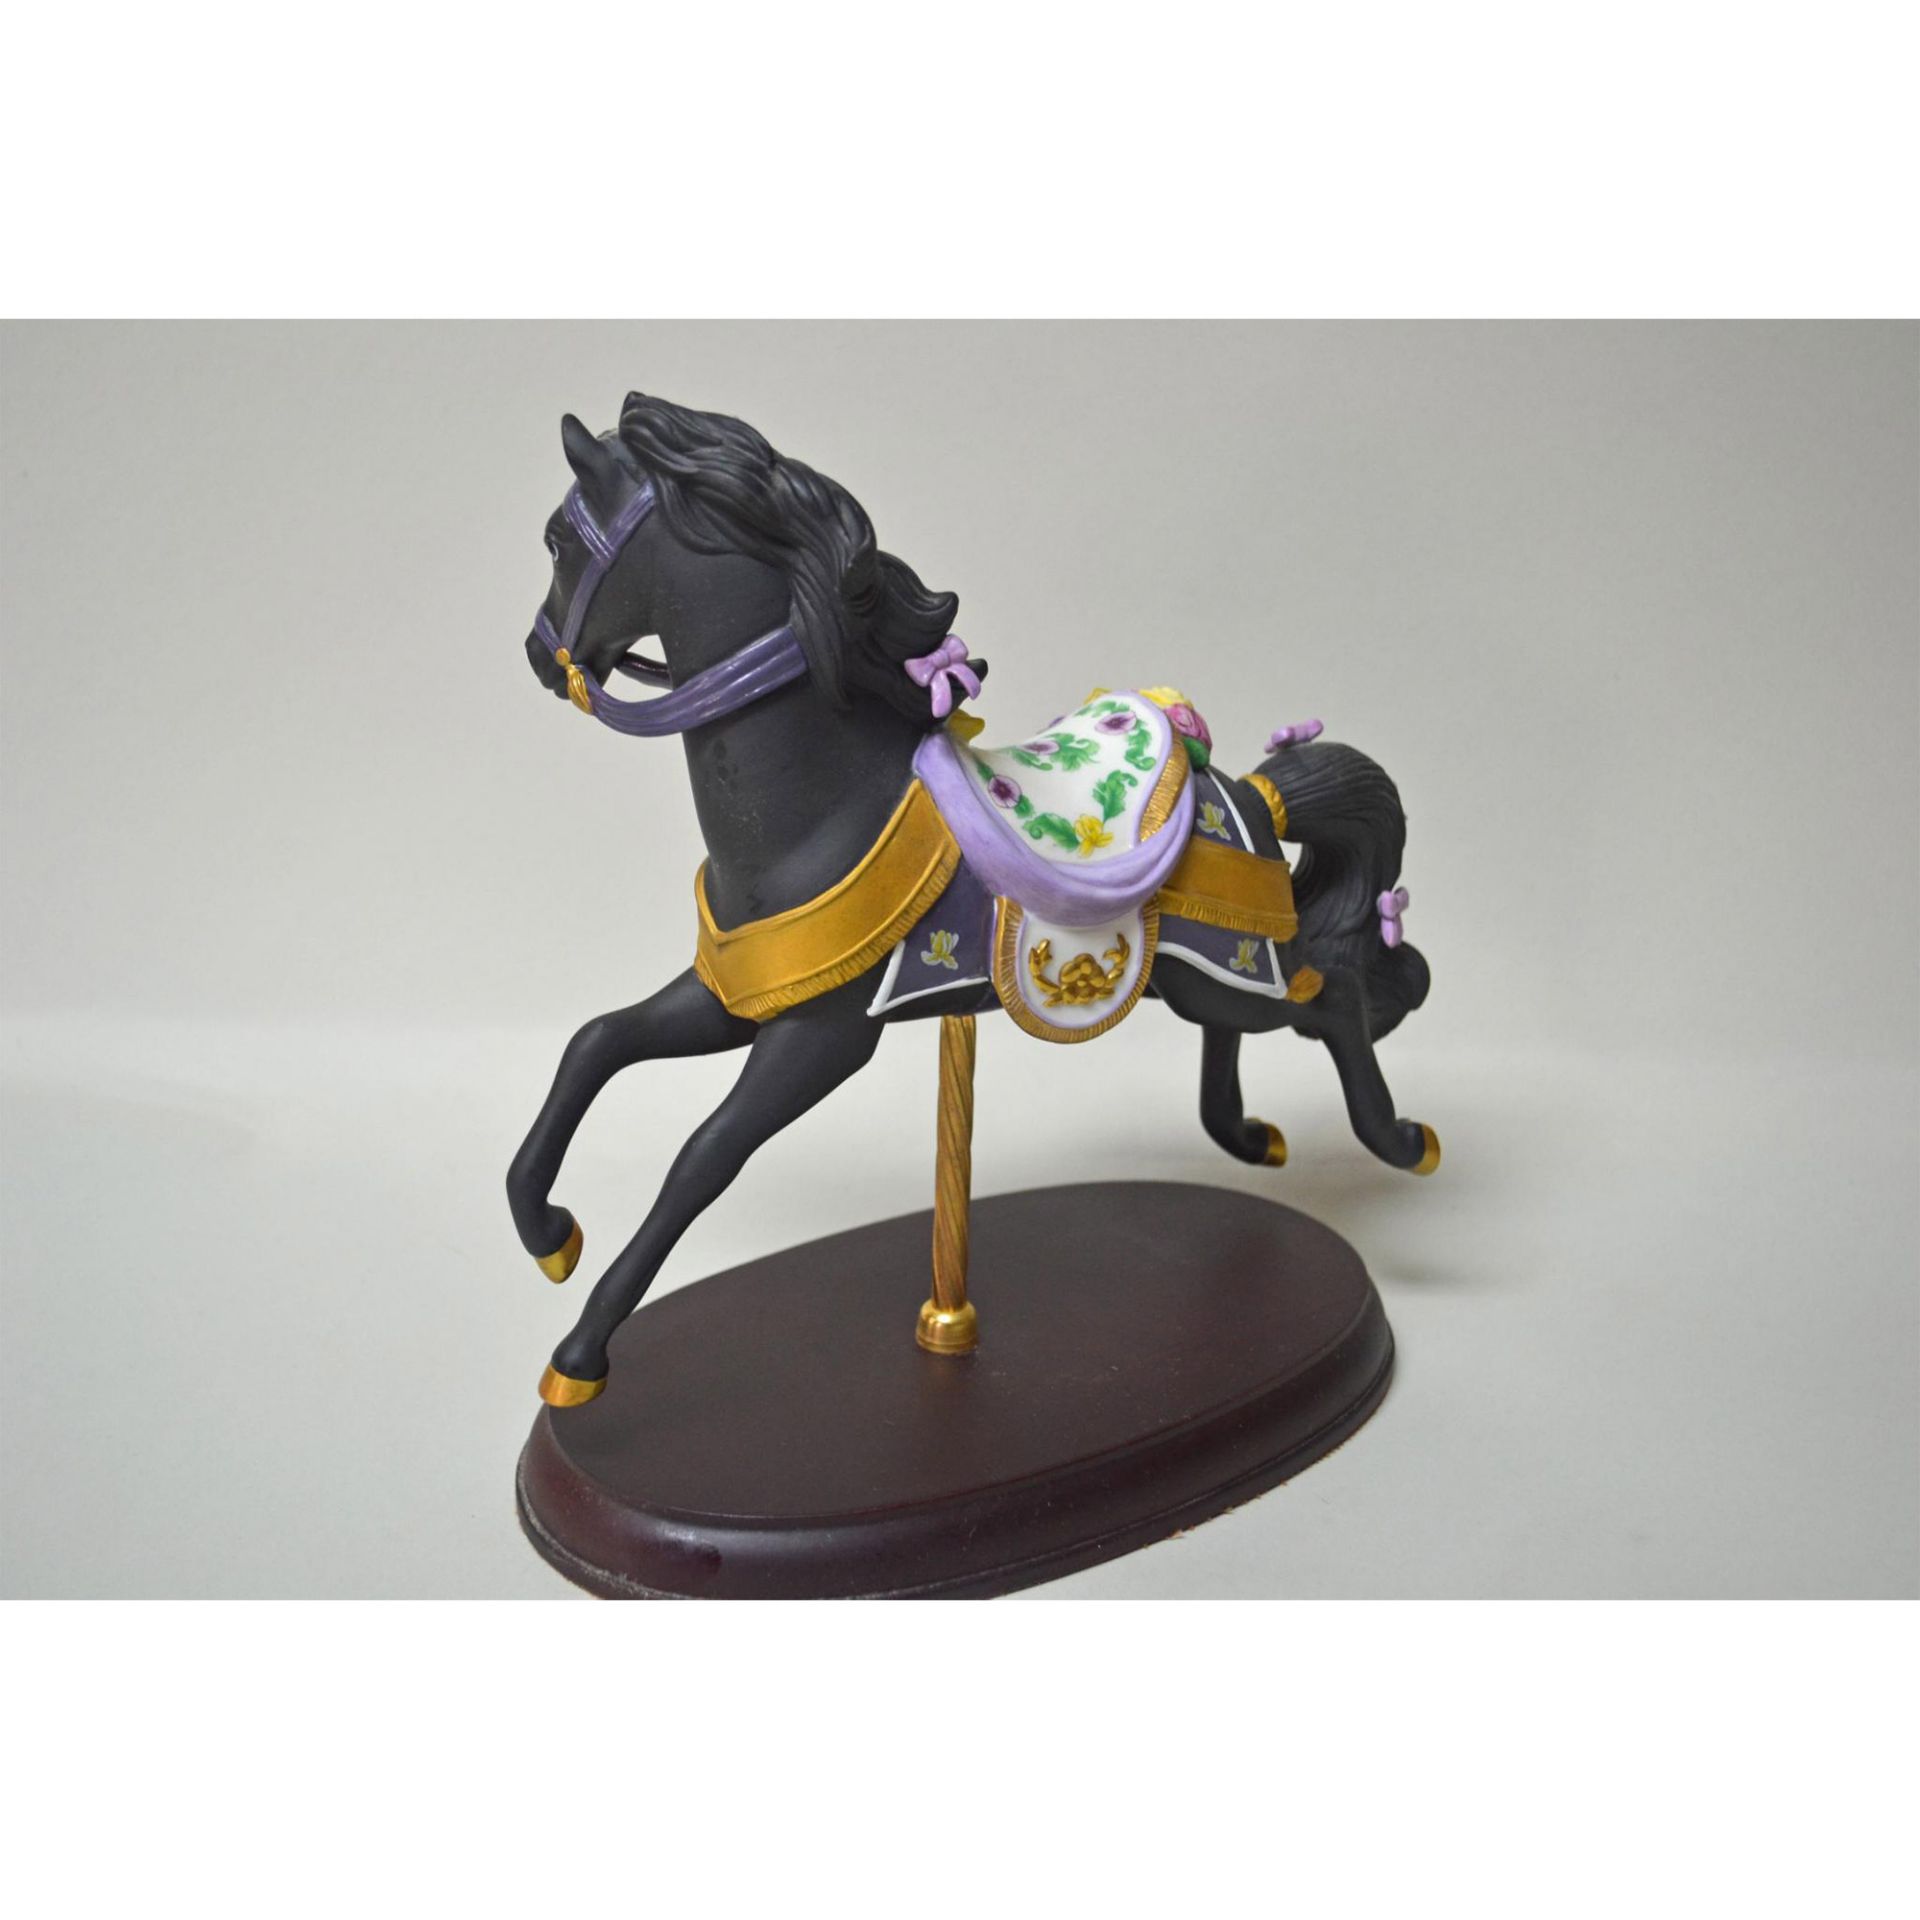 Lenox Vintage Carousel 1993 Midnight Charger Horse Figurine - Image 2 of 4